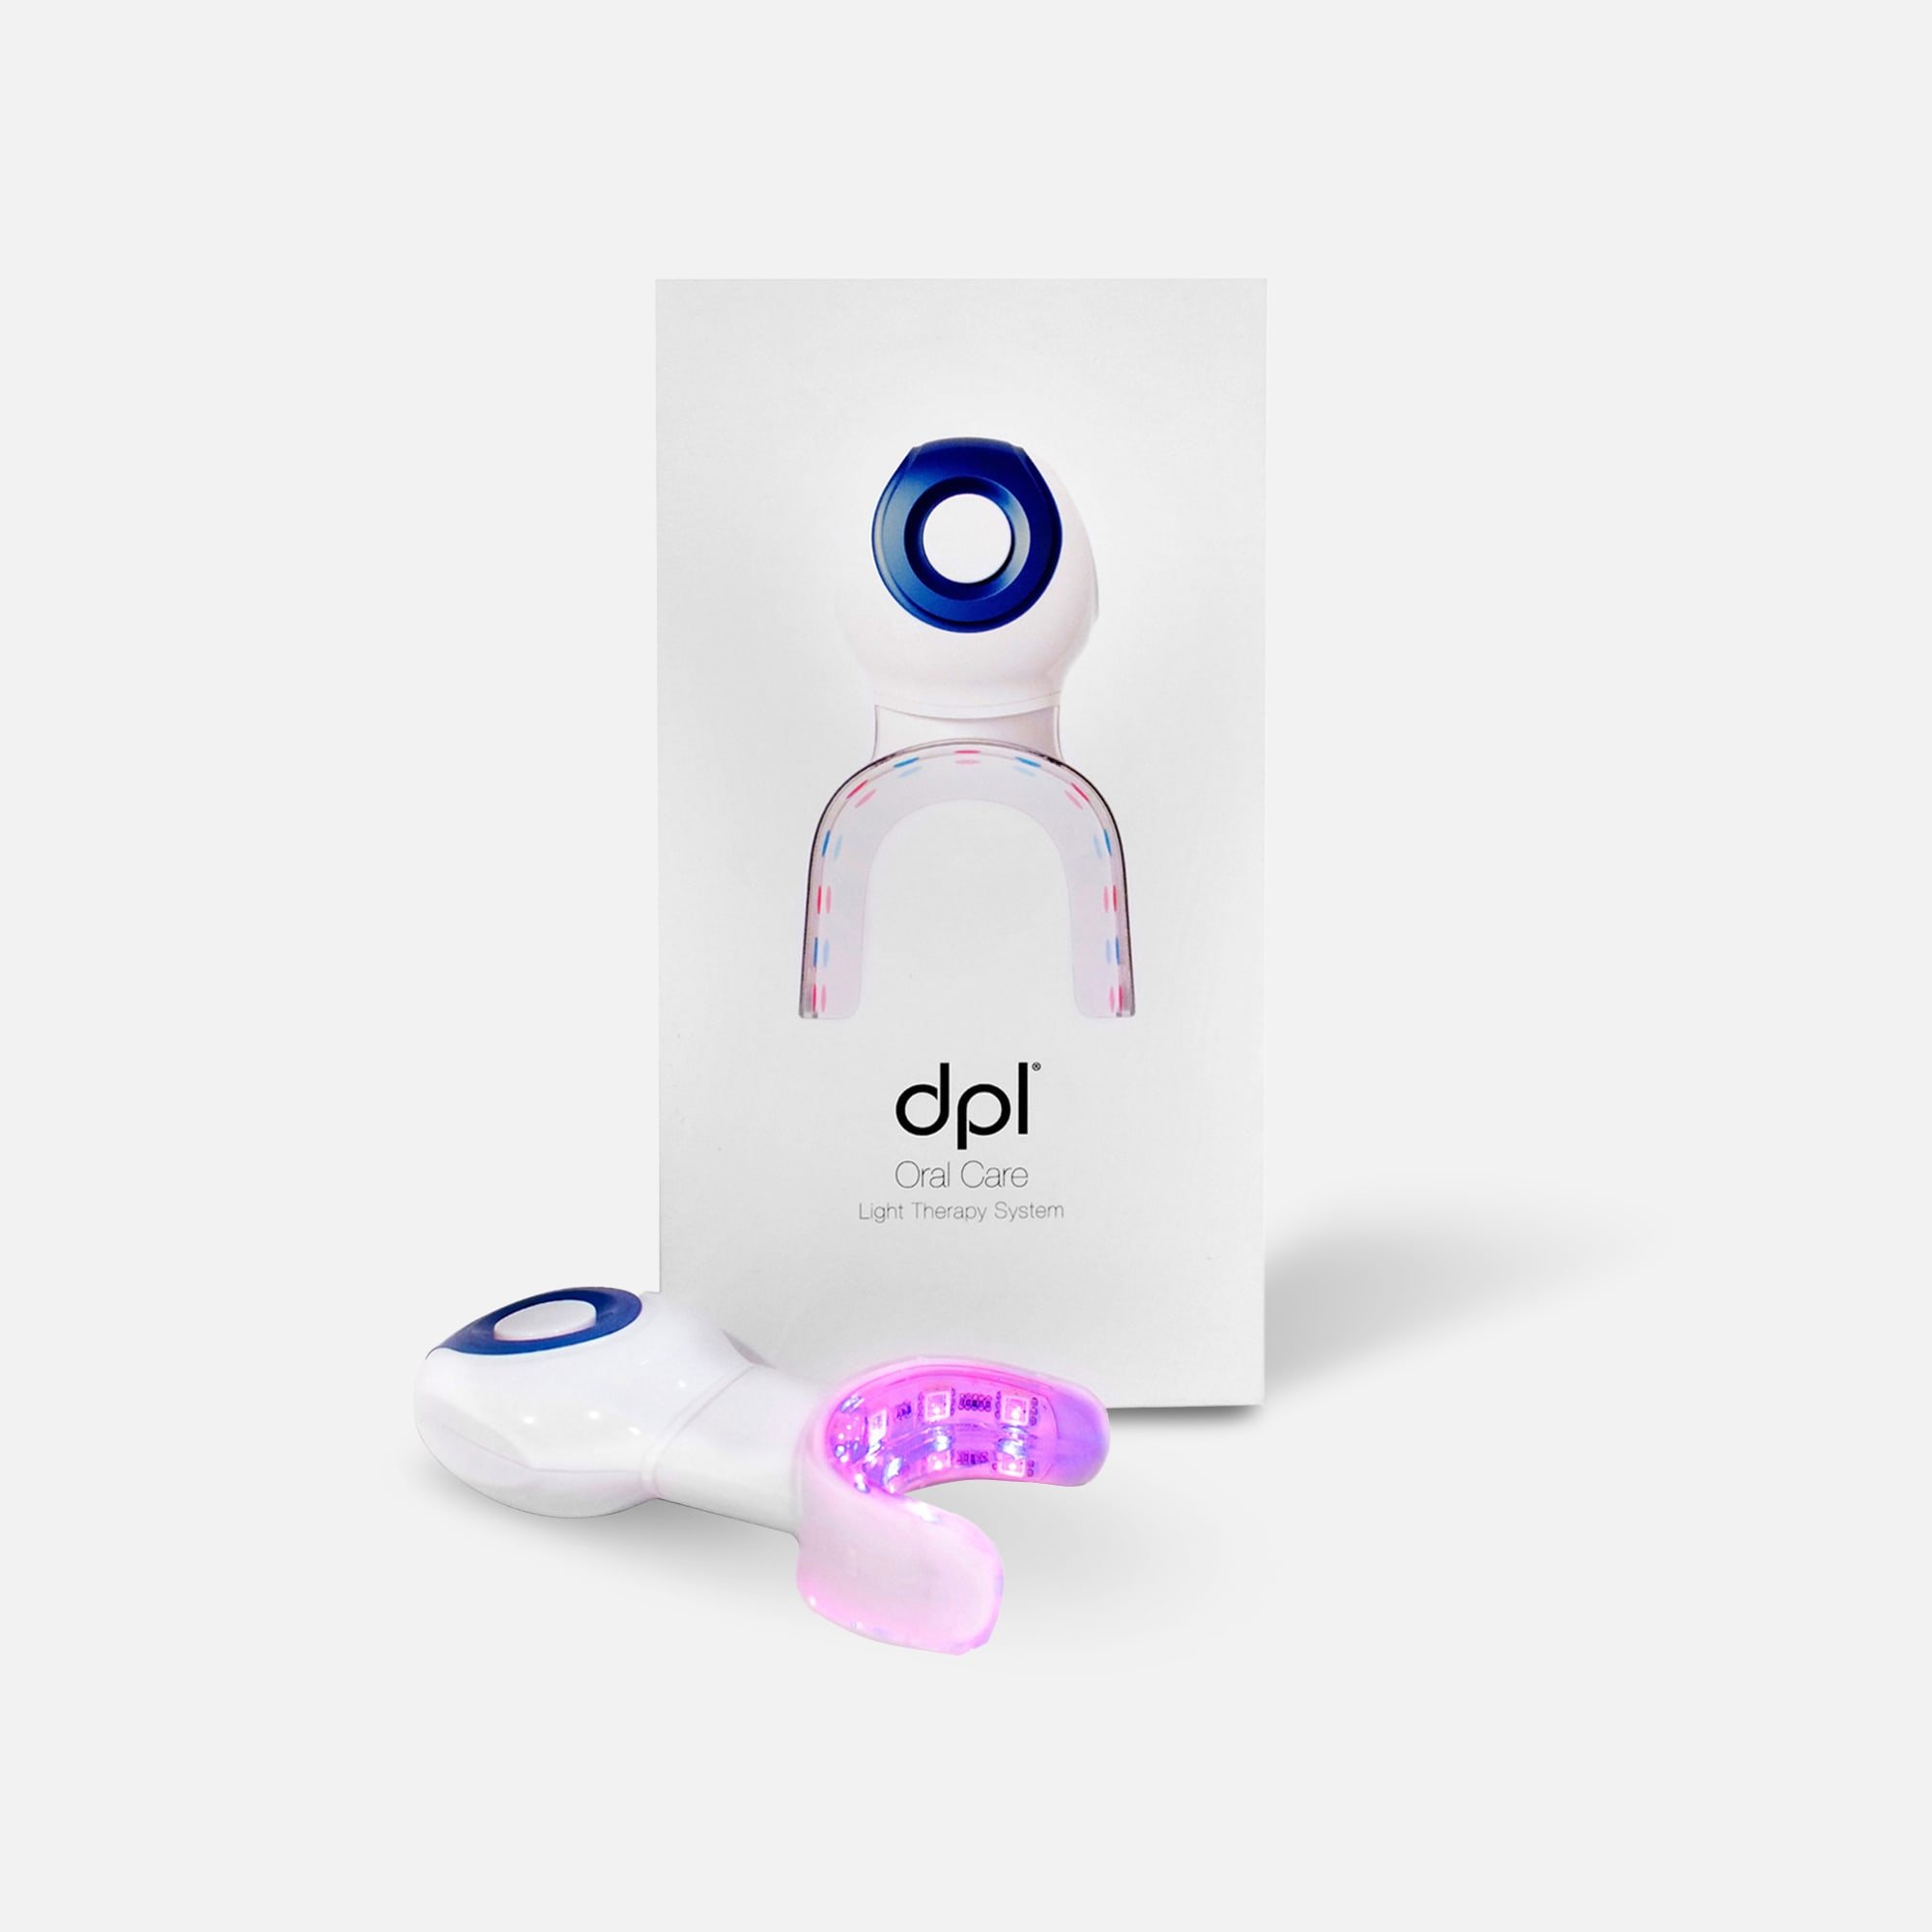 Dpl Care Light Therapy System